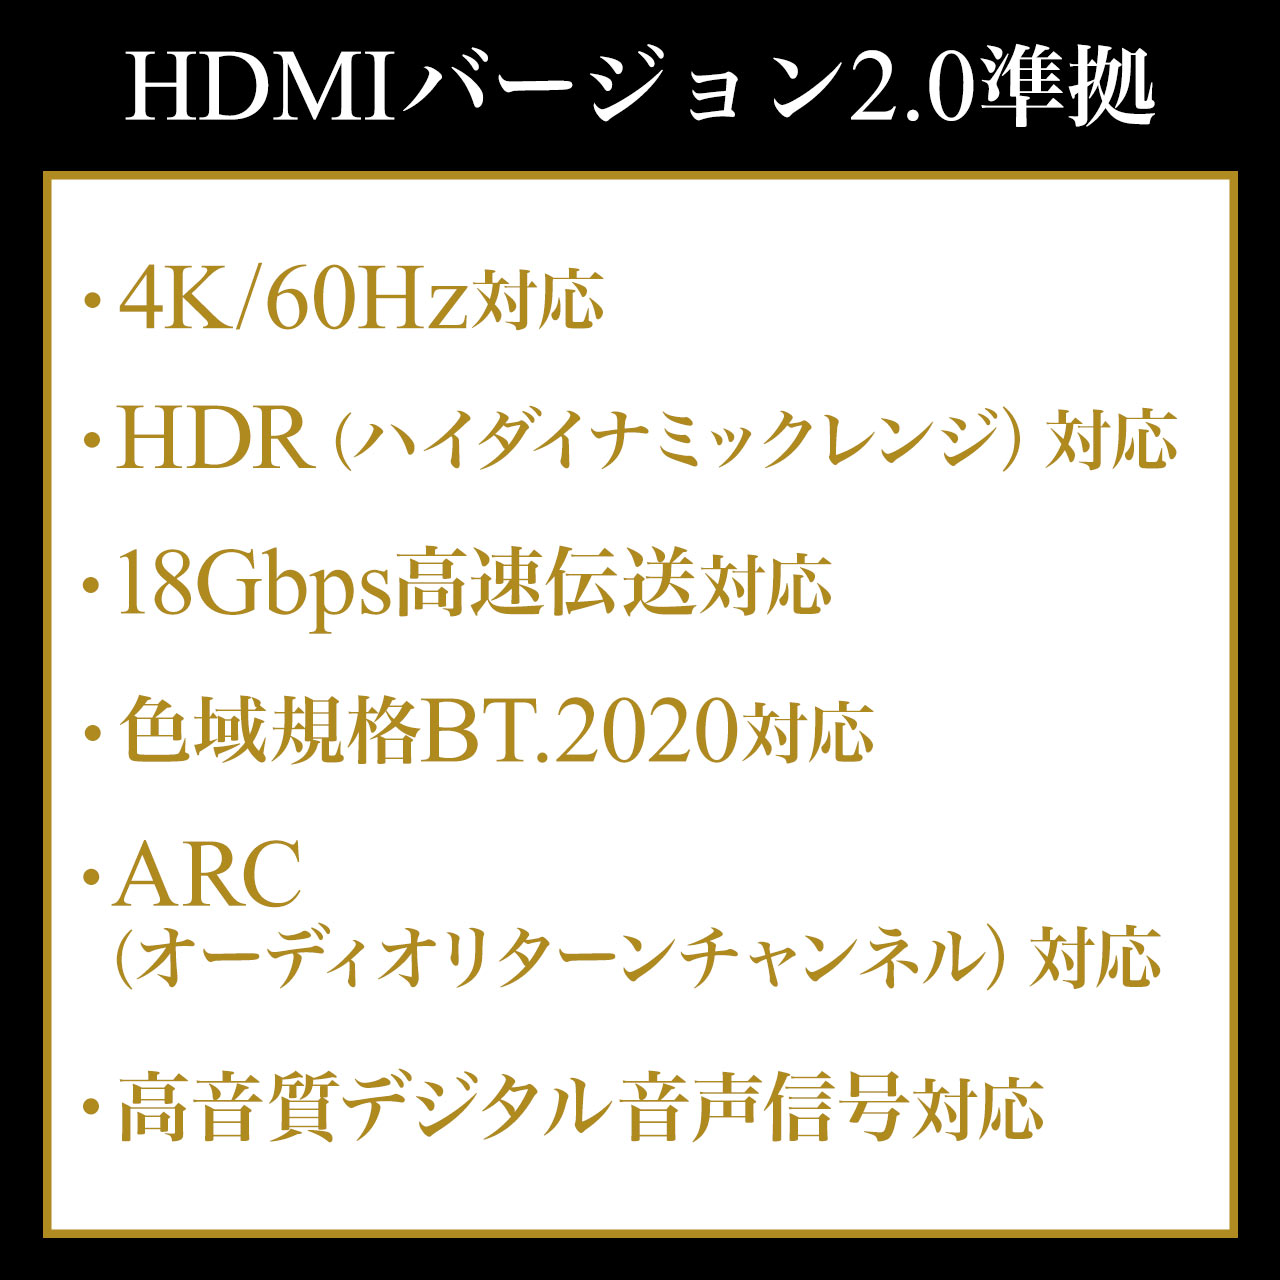 HDMIt@CoP[uiHDMIP[uE4K/60HzE18GbpsEHDRΉEo[W2.0iE20mEubNj 500-HD021-20